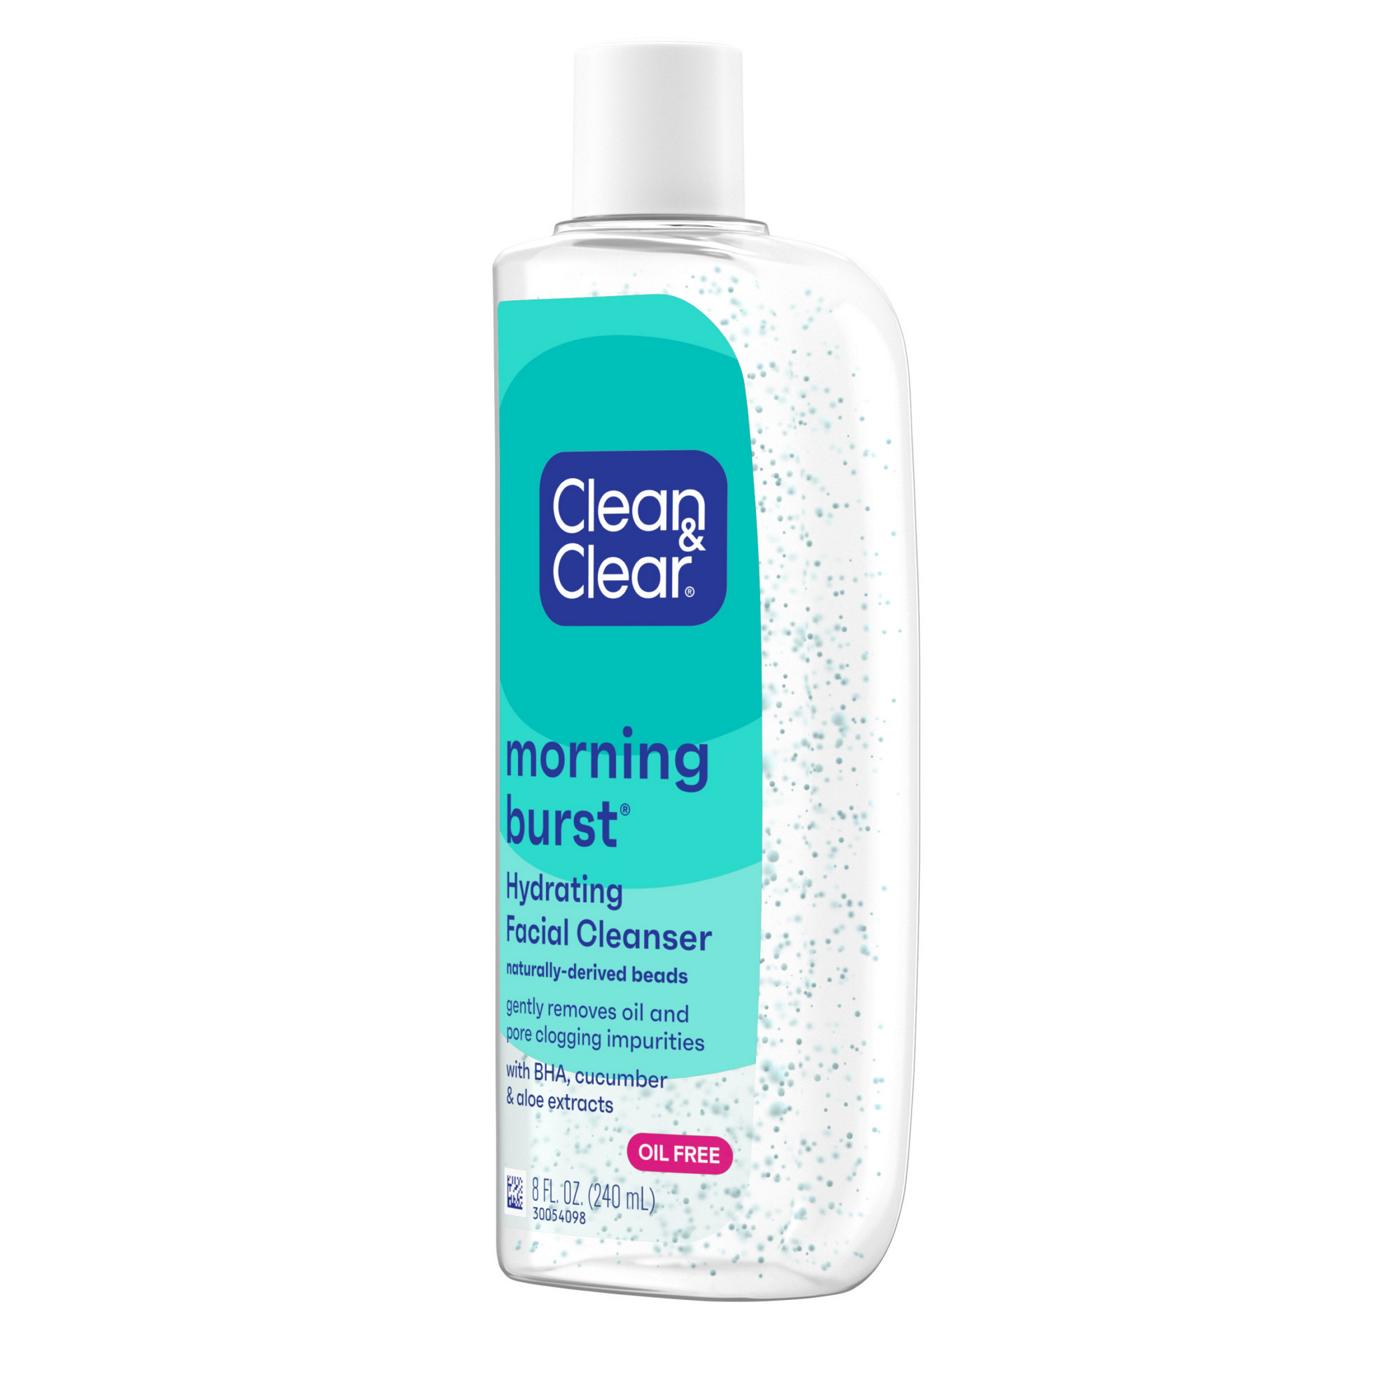 Clean & Clear Morning Burst Hydrating Facial Cleanser; image 2 of 8